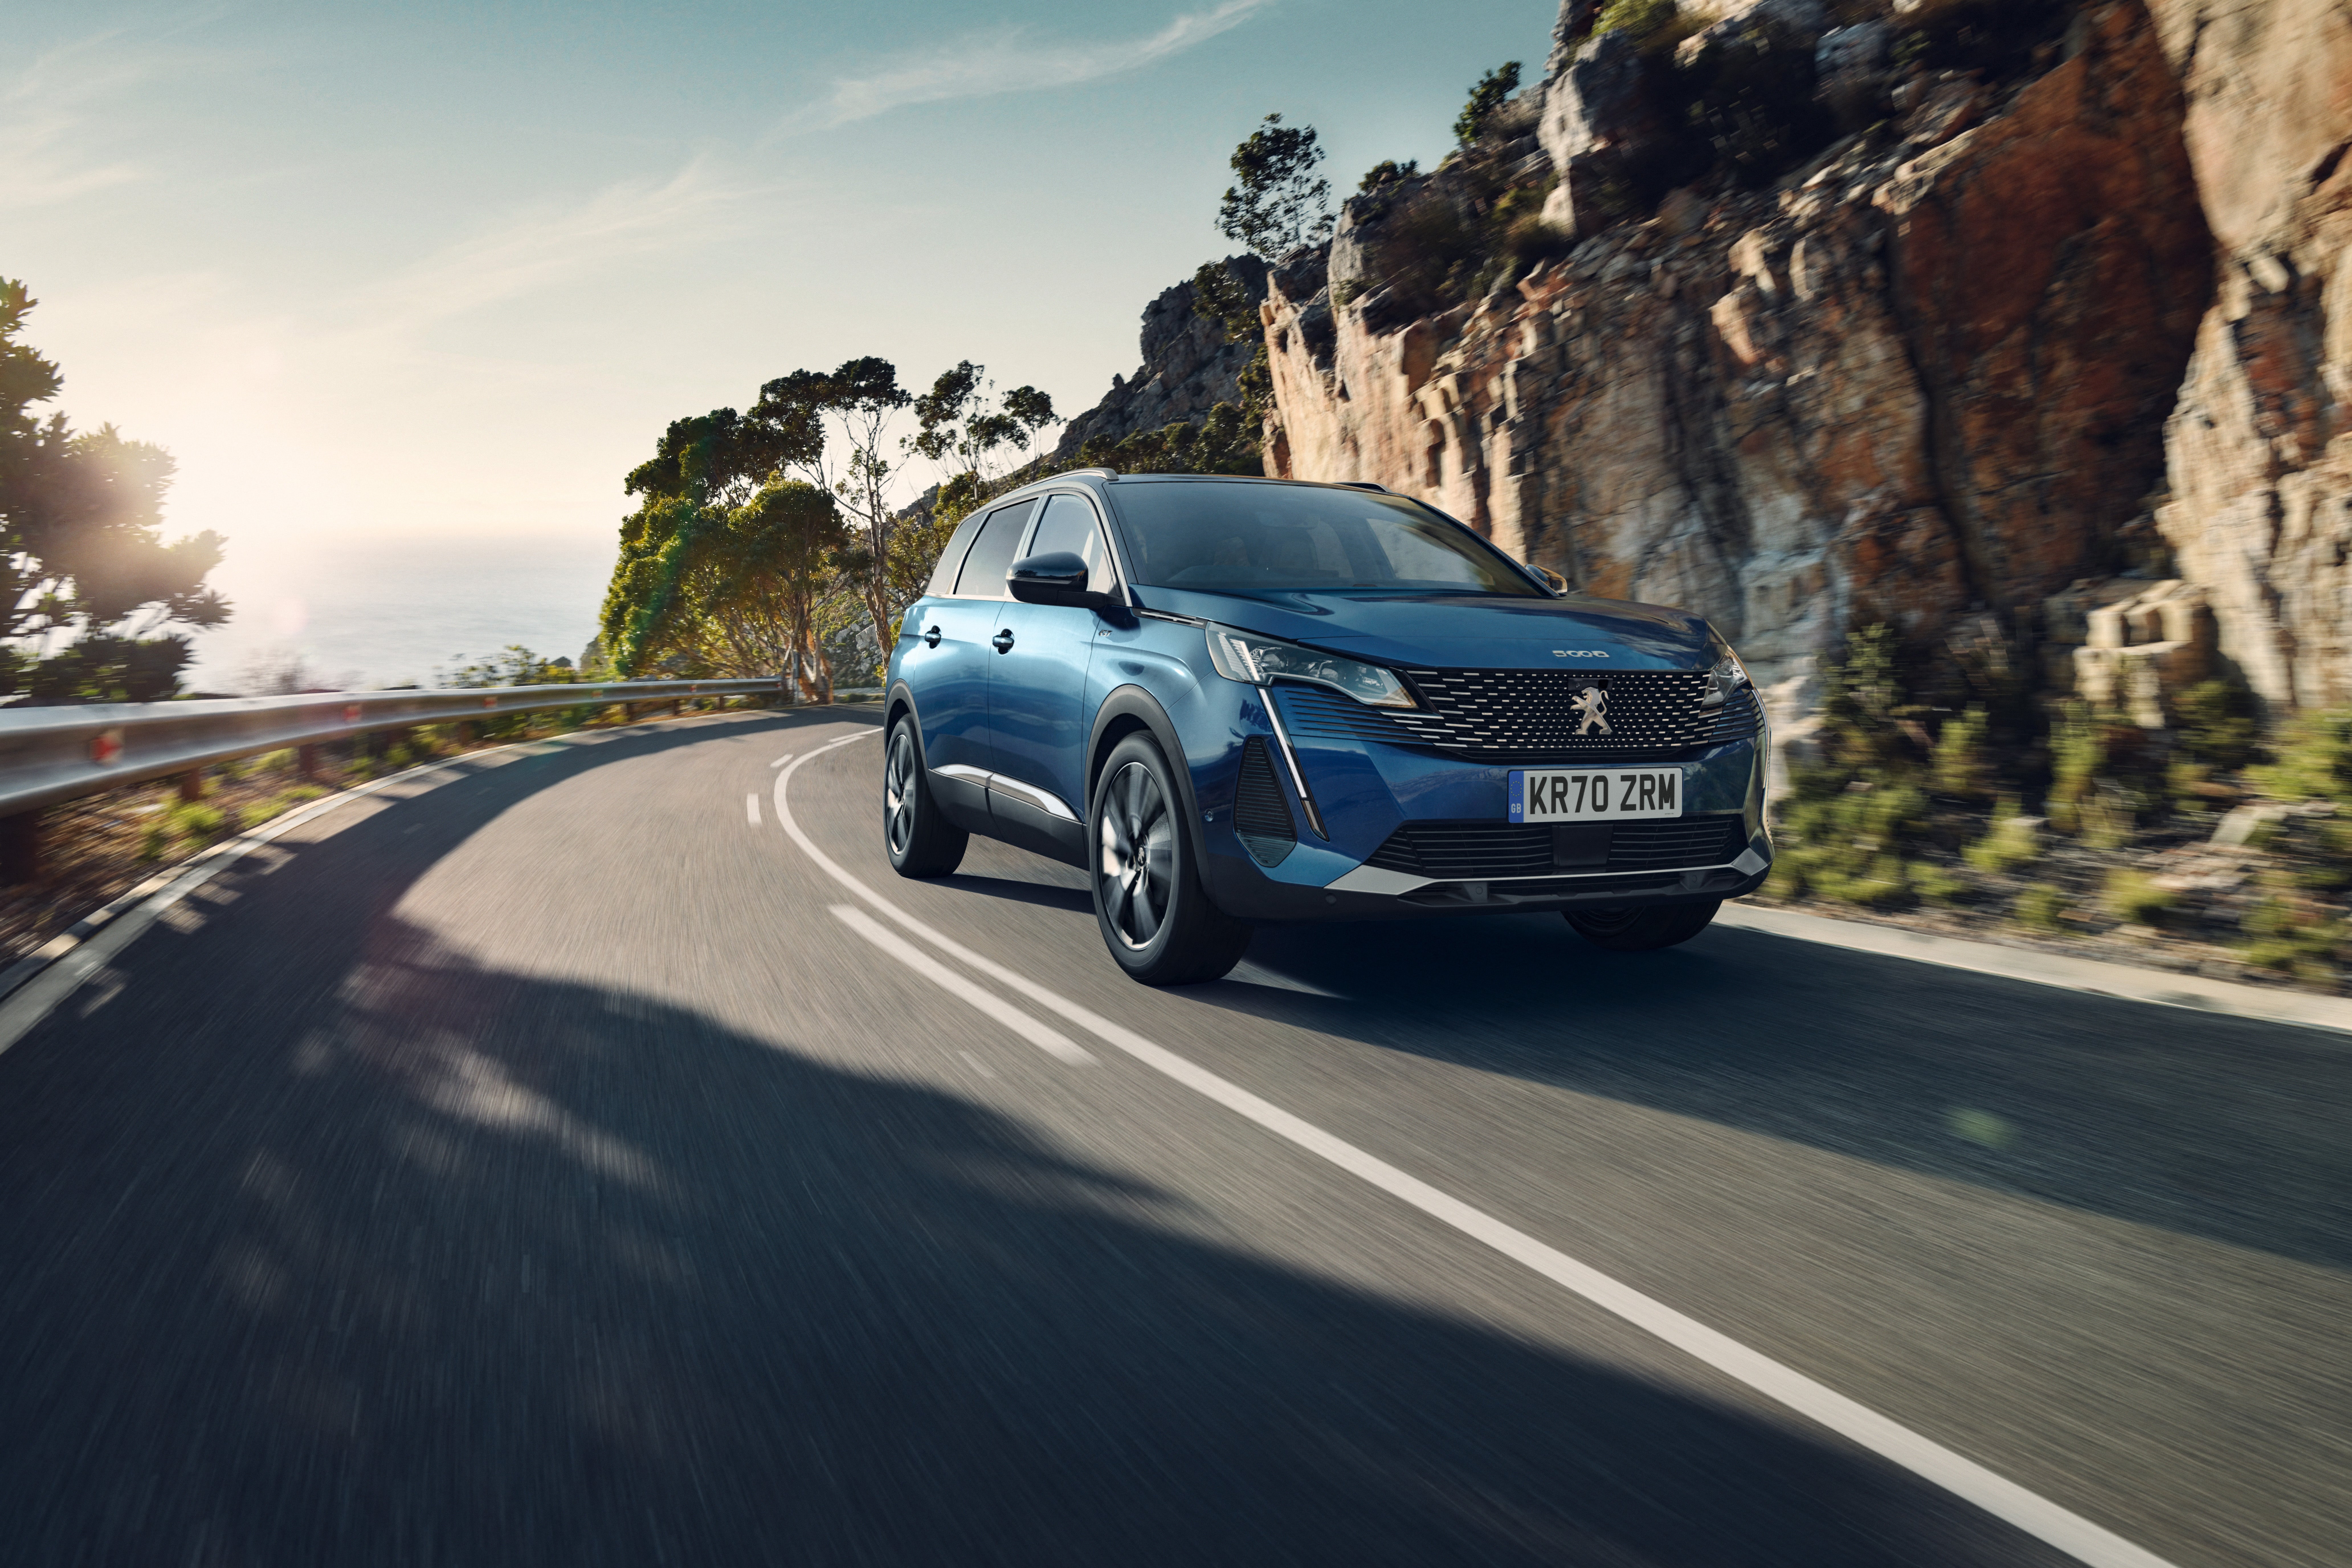 Road runner: the Peugeot 5008 Hybrid has much to offer in an incredibly crowded segment of the market